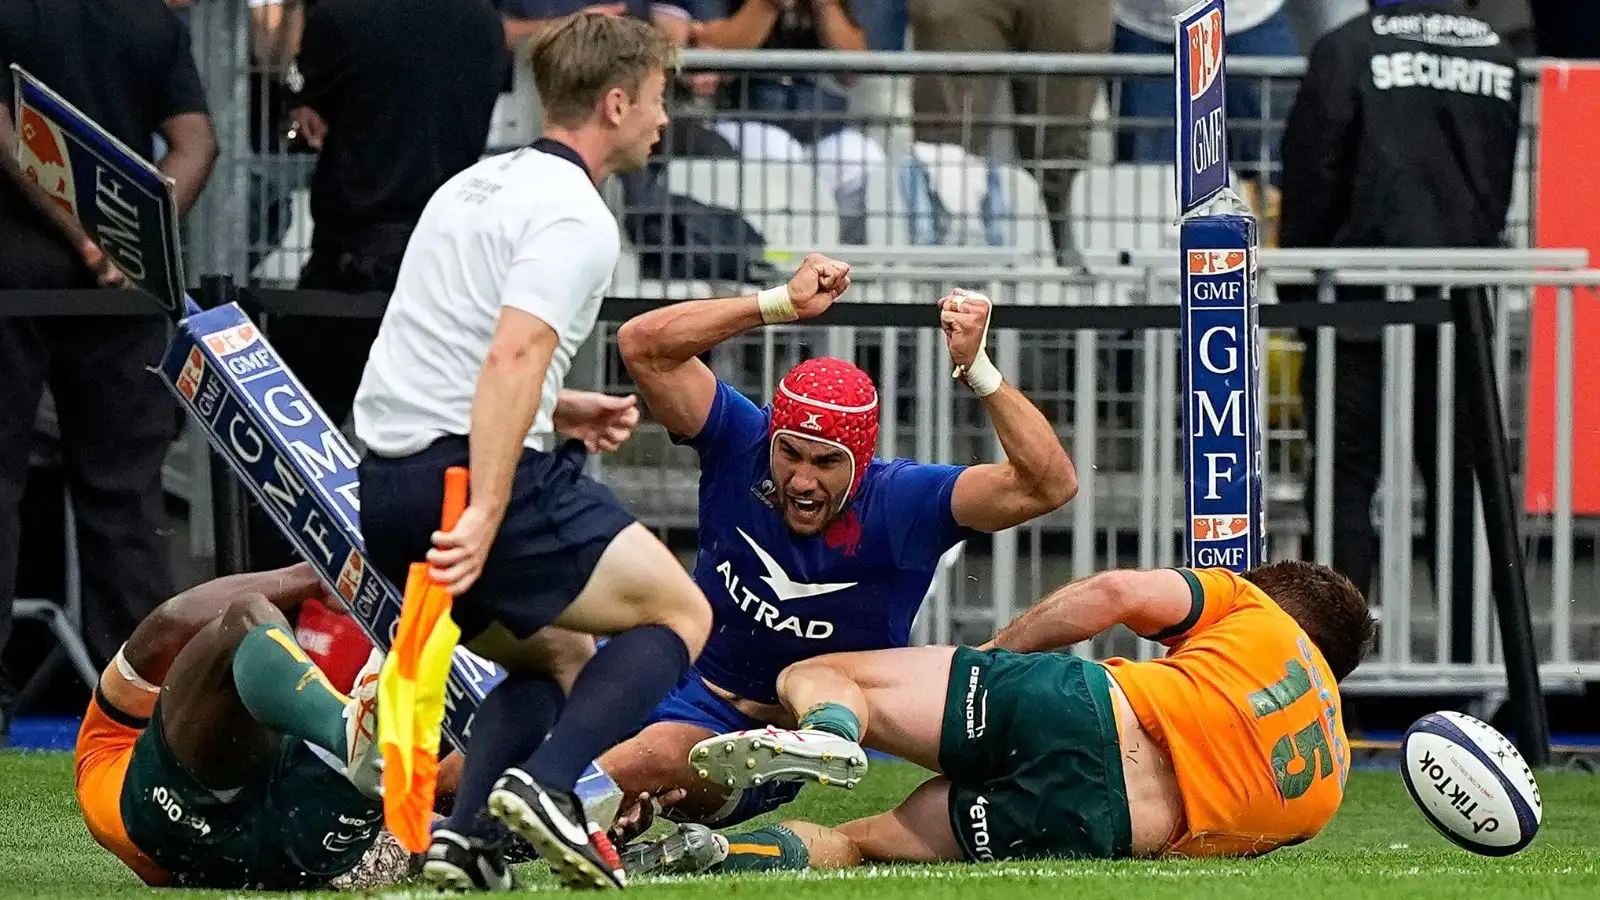 France's Gabin Villiere celebrates scoring a try during the International Rugby Union World Cup warm-up match between France and Australia at the Stade de France stadium in Saint Denis, outside Paris